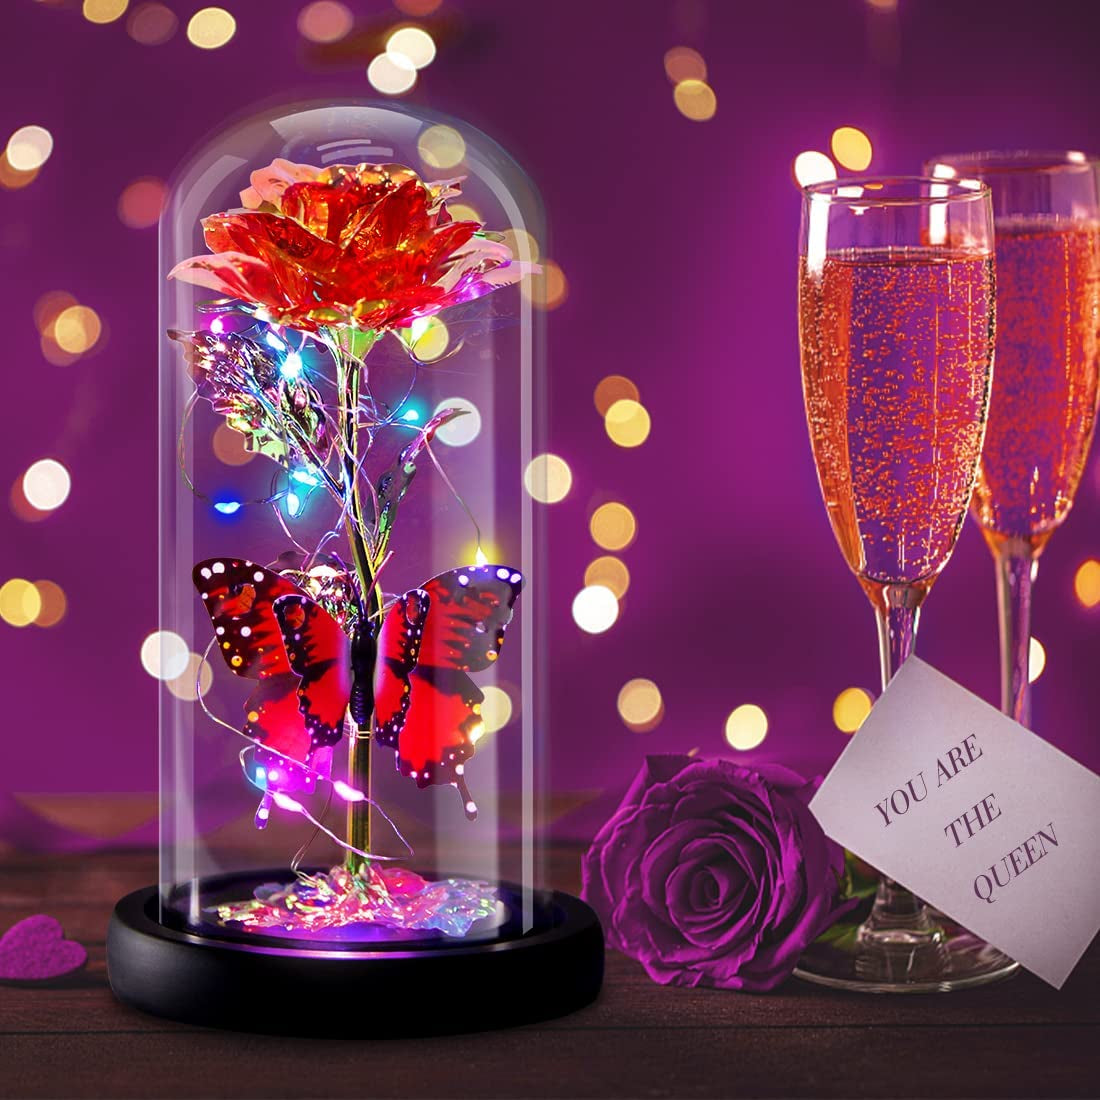 Galaxy Flowers Rose Birthday Gift for Women Mom Grandma, Enchanted Infinity Rose in Glass Dome, Valentines Rose Gifts for Valentine'S Day Mother'S Day Anniversary Wedding